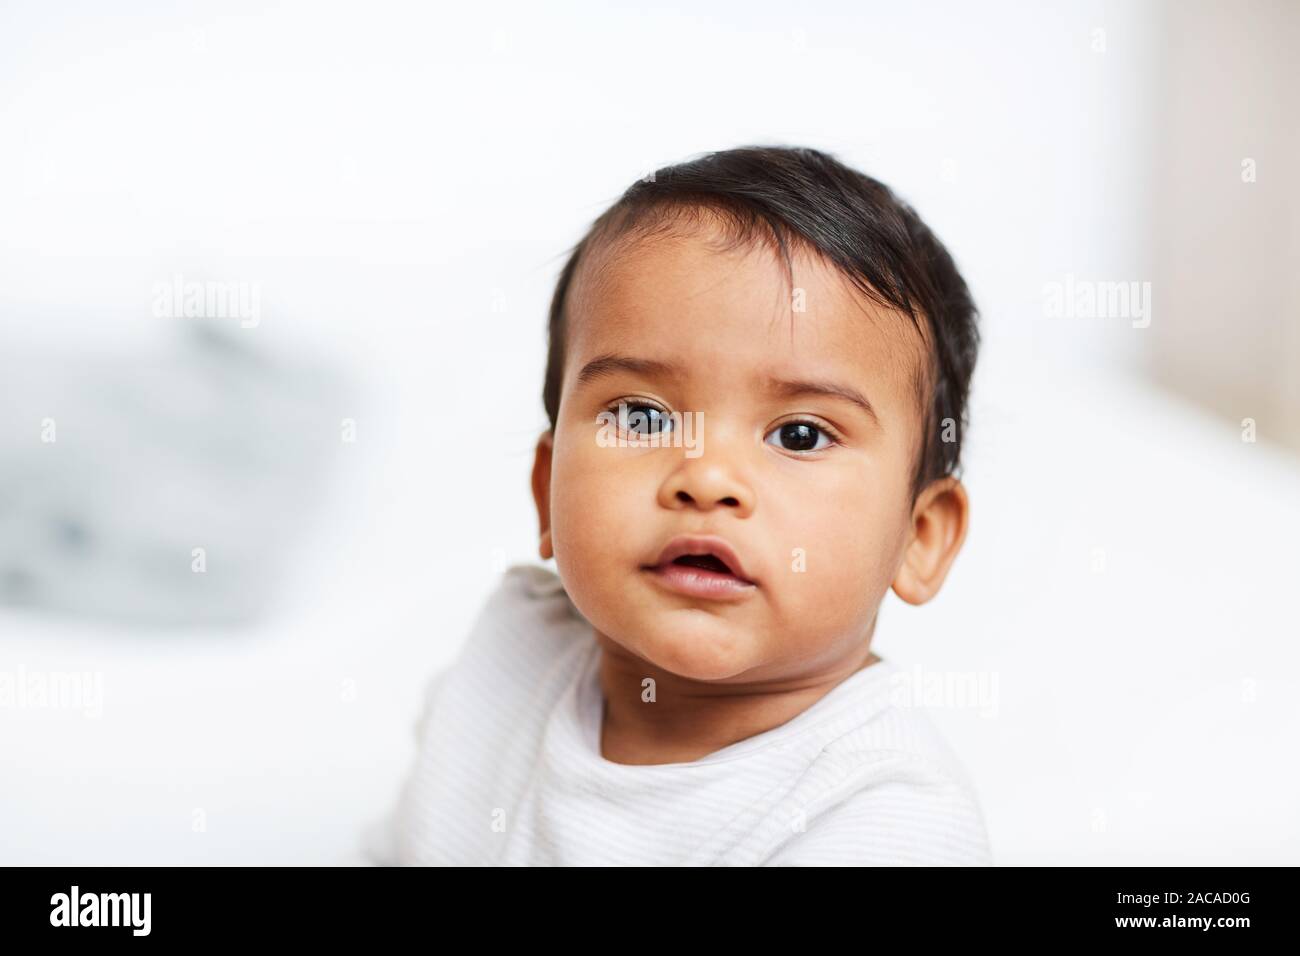 Cute Babies Black White Mixed High Resolution Stock Photography And Images Alamy